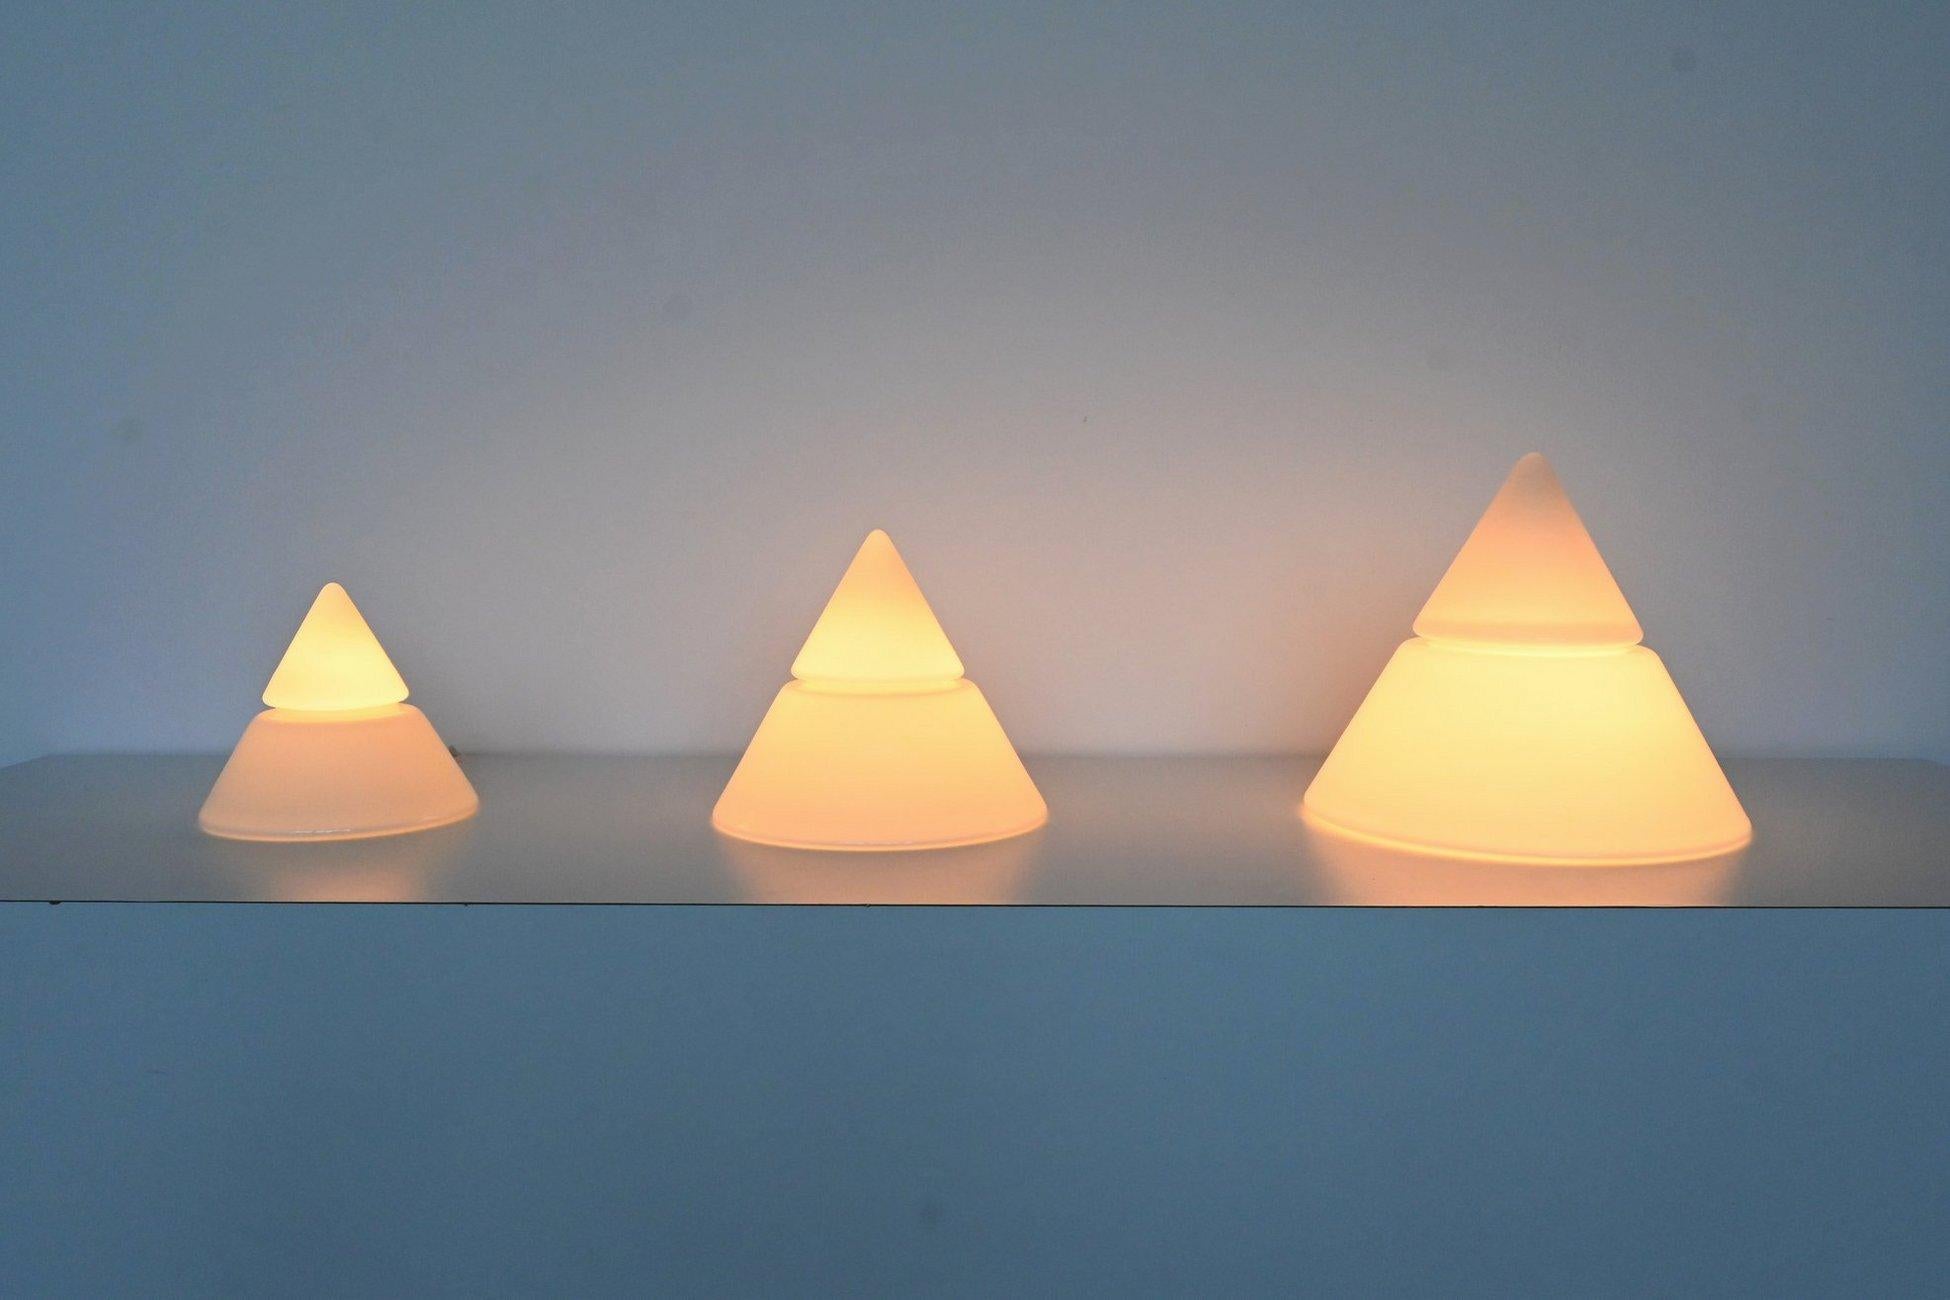 Beautiful set of three “Kilimanjaro” table lamps model D-2136 designed by Sergio Asti for RAAK Amsterdam, The Netherlands 1978. The name comes from a mountain area in Tanzania. This set consists of all three sizes which are available from this